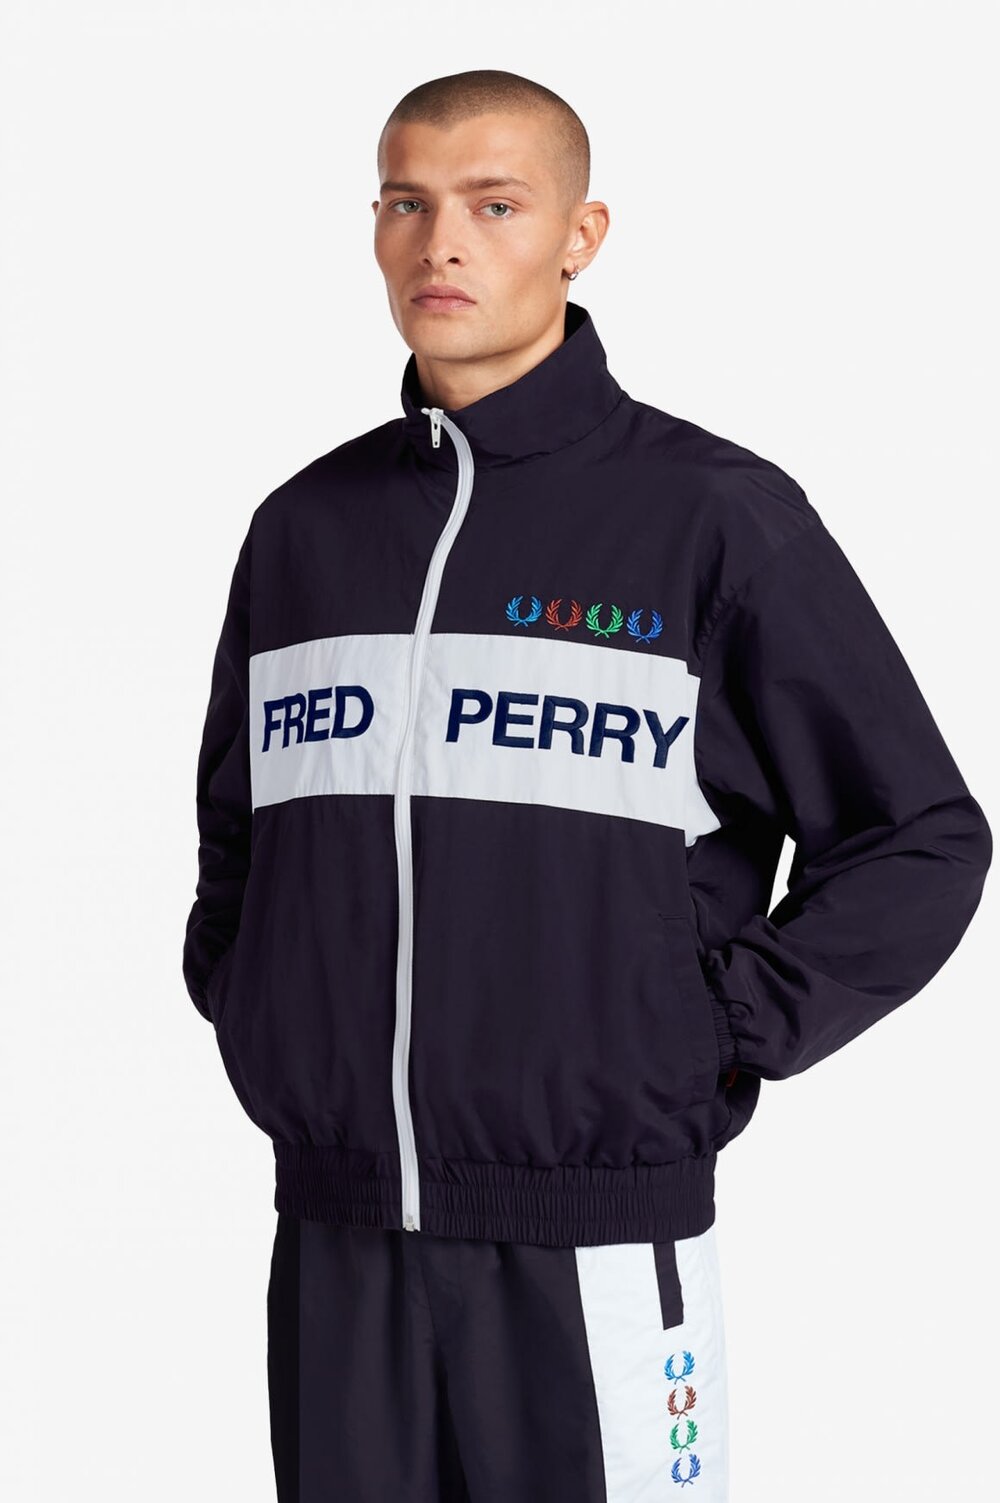 fred-perry5.jpg